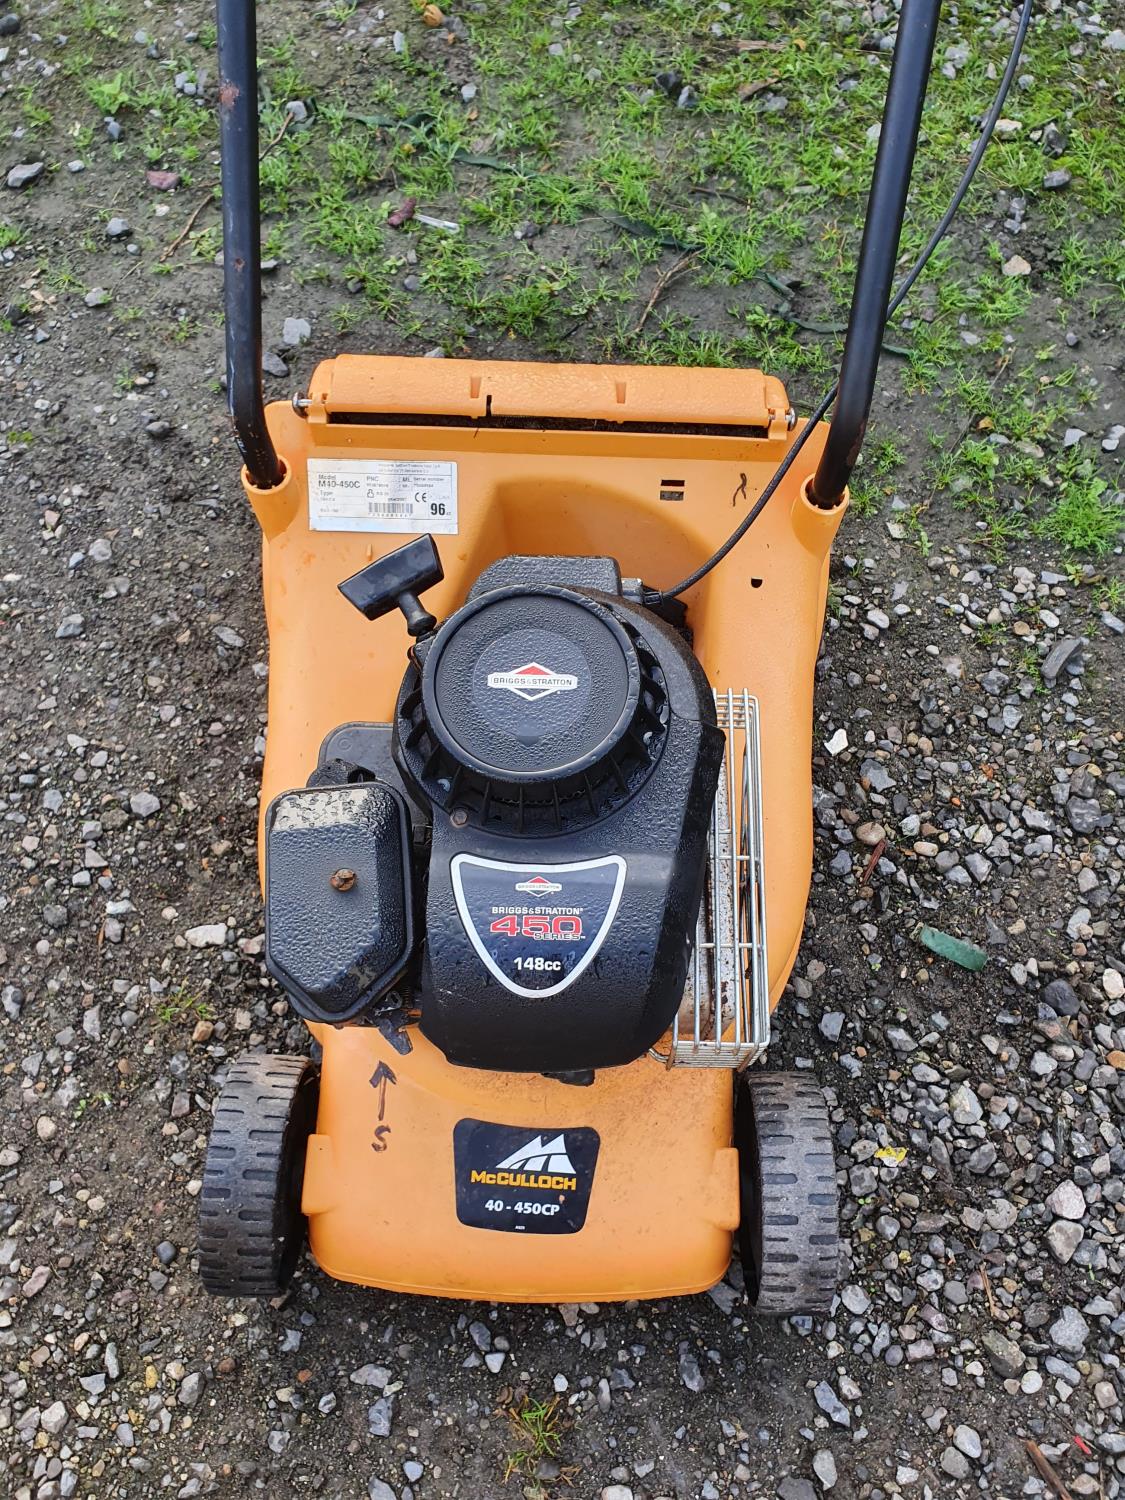 A McCulloch 450 148cc Lawnmower with a Briggs & Stratton engine. - Image 2 of 2